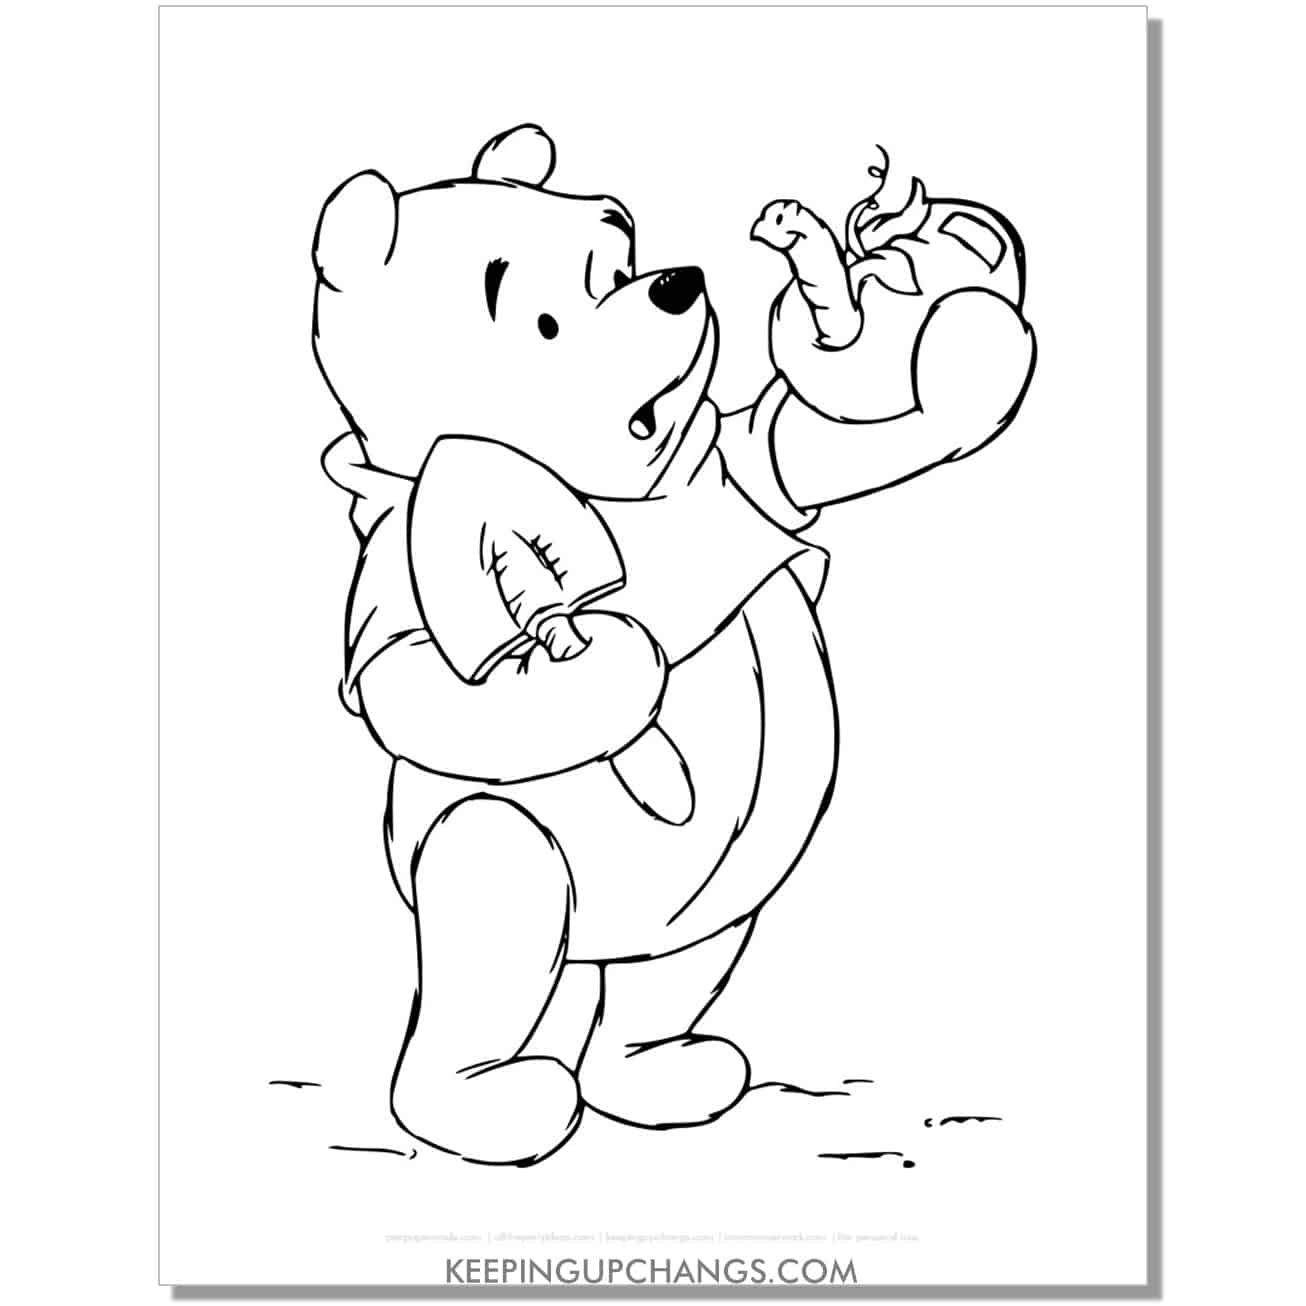 winnie the pooh holding apple with worm coloring page, sheet.